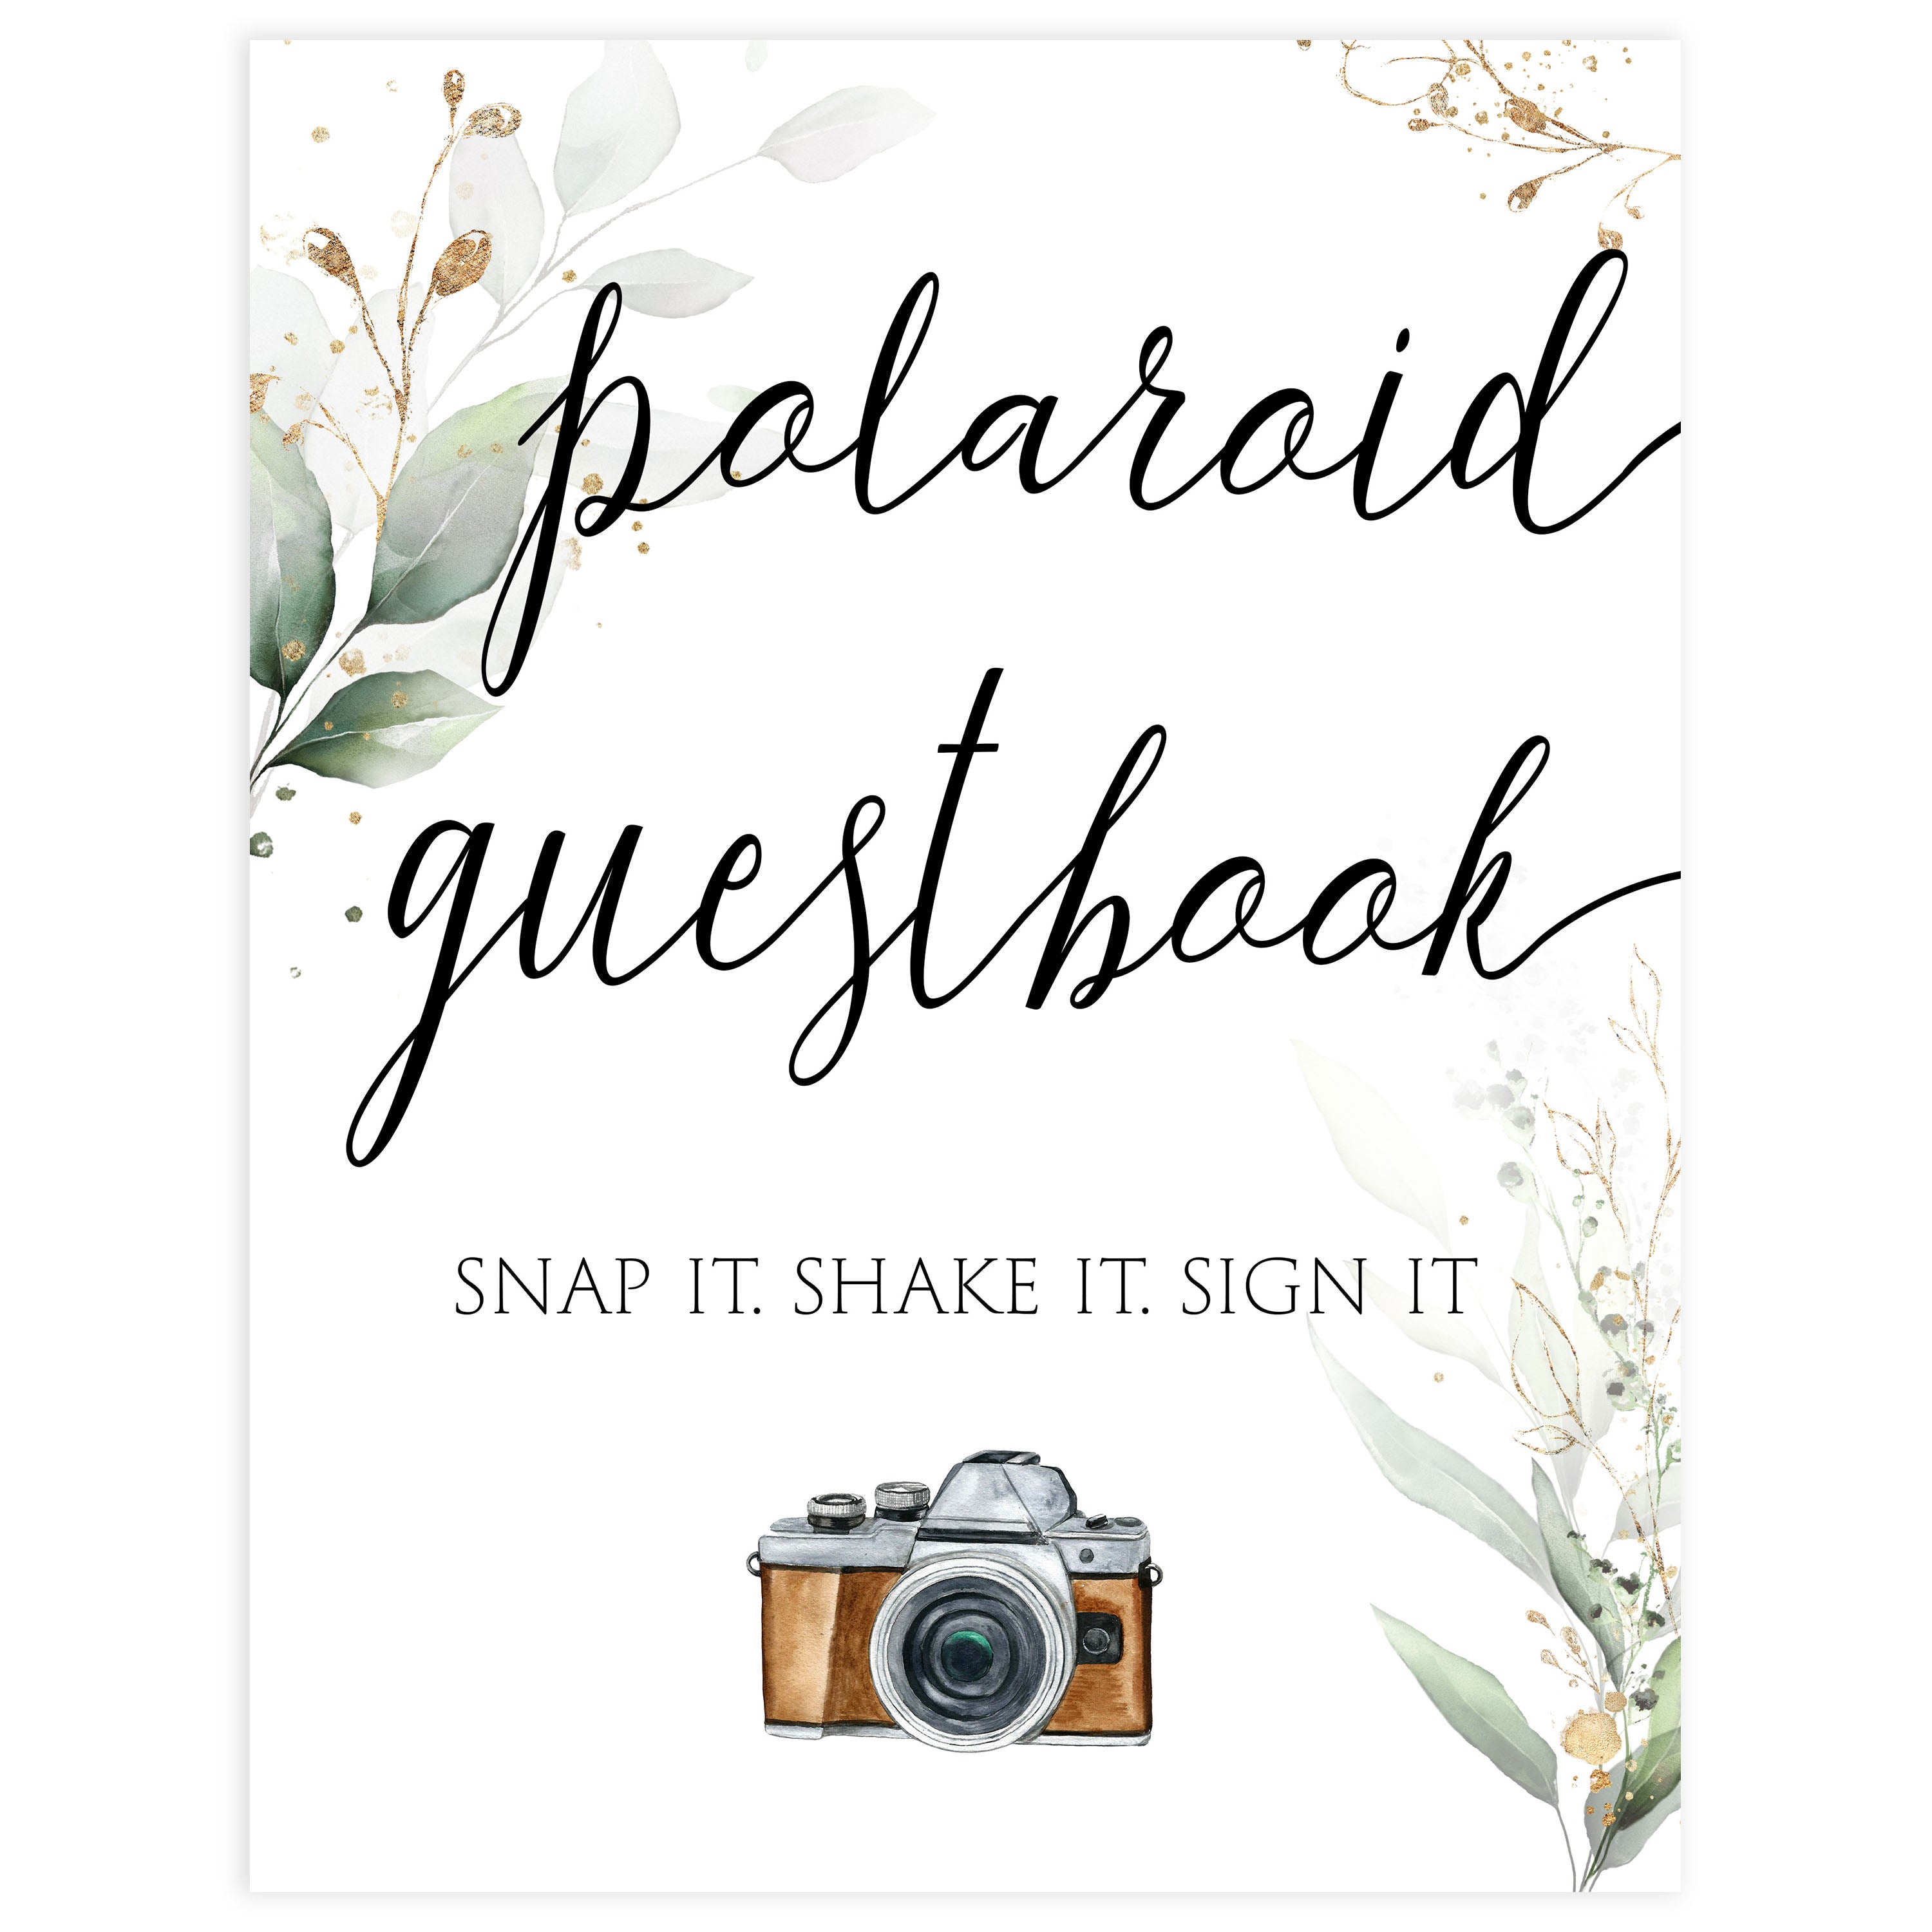 How to Set Up a Polaroid Guest Book Table at Your Wedding